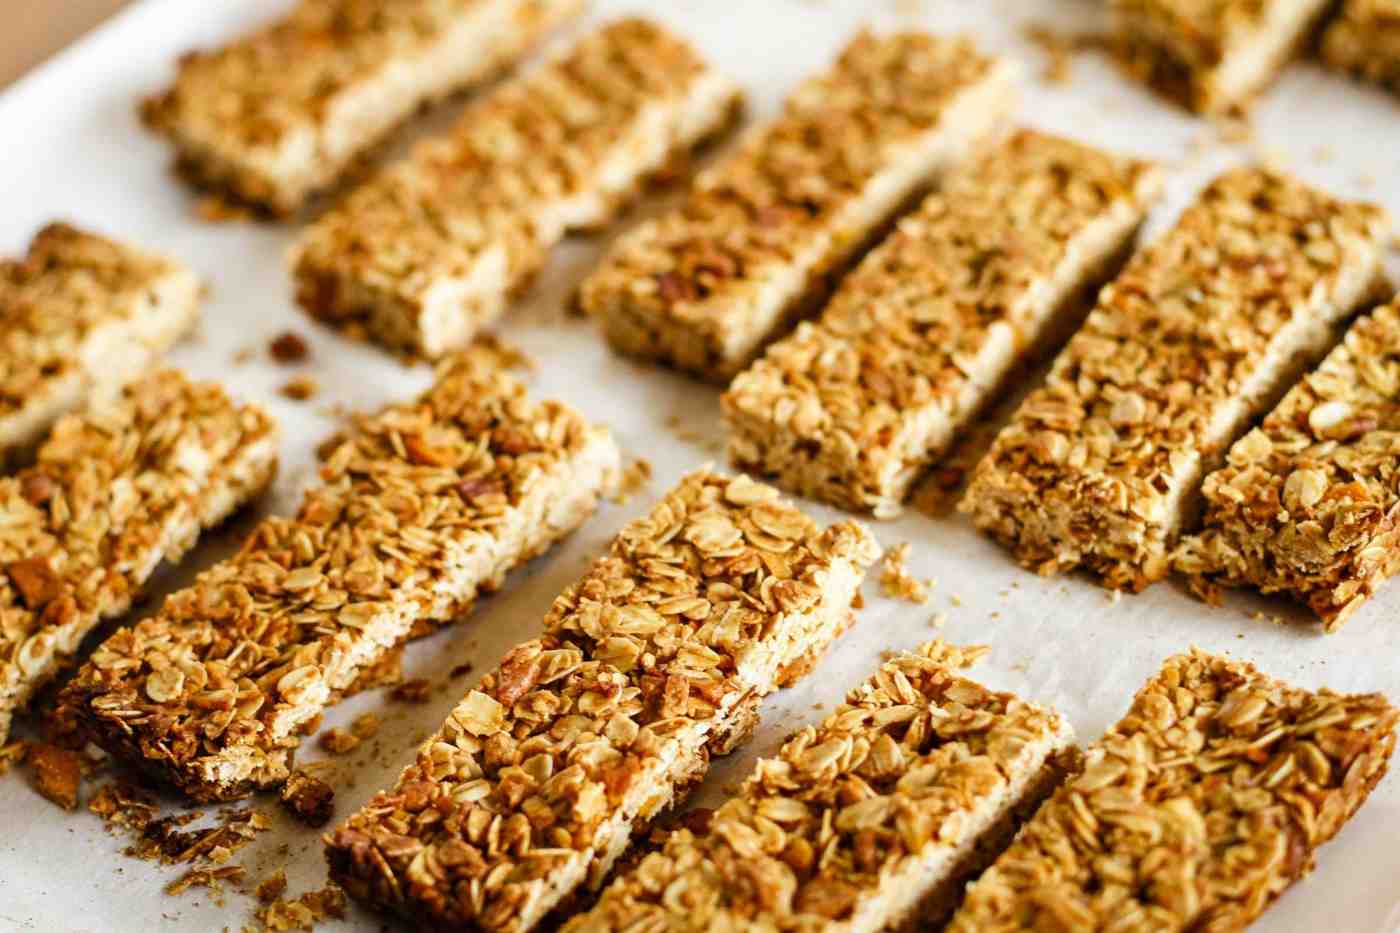 Muesli bars are classic among healthy snacks for the school